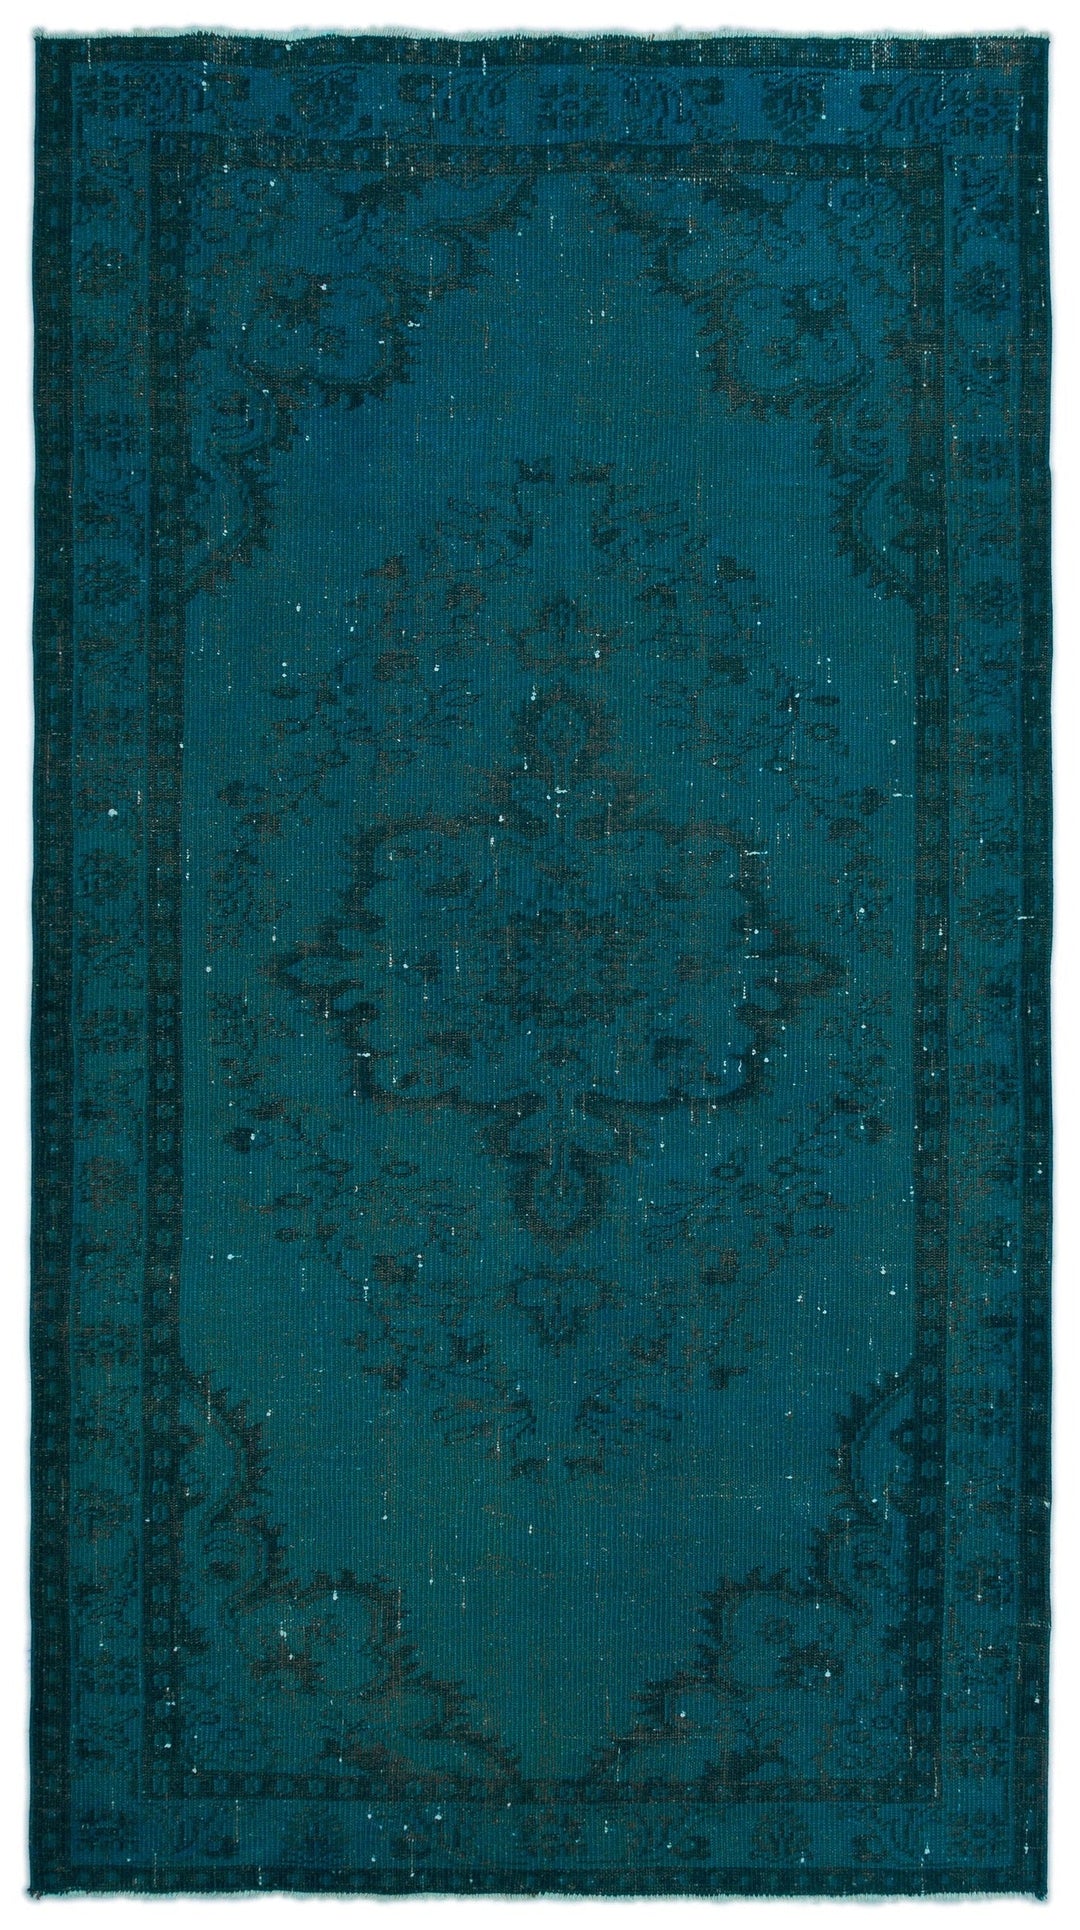 Athens Turquoise Tumbled Wool Hand Woven Carpet 150 x 272